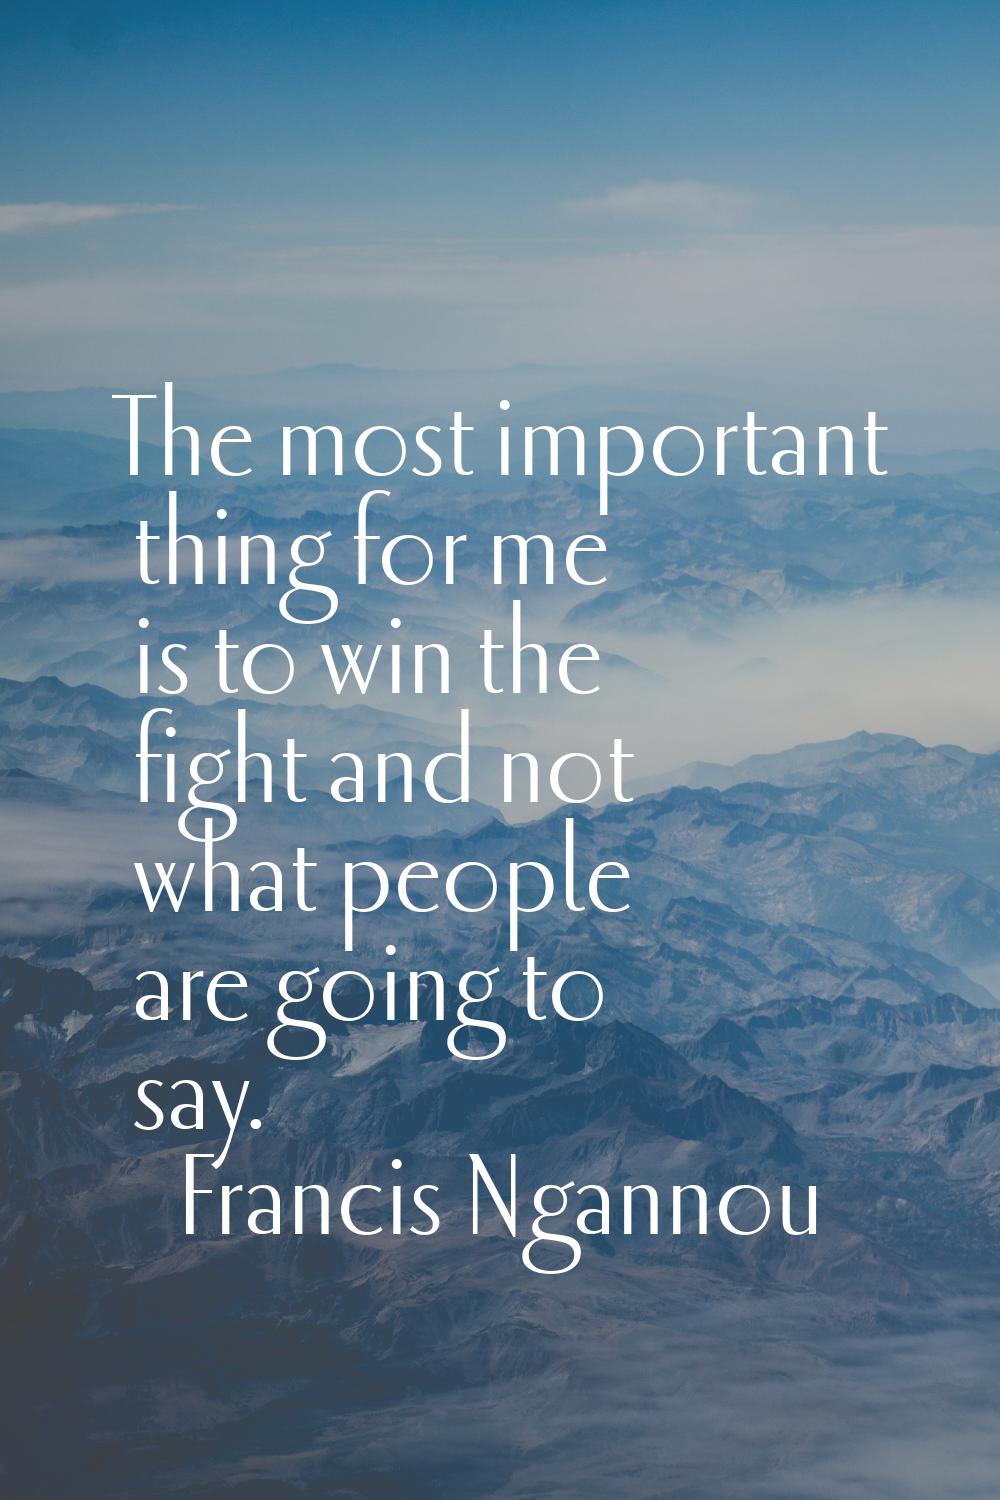 The most important thing for me is to win the fight and not what people are going to say.